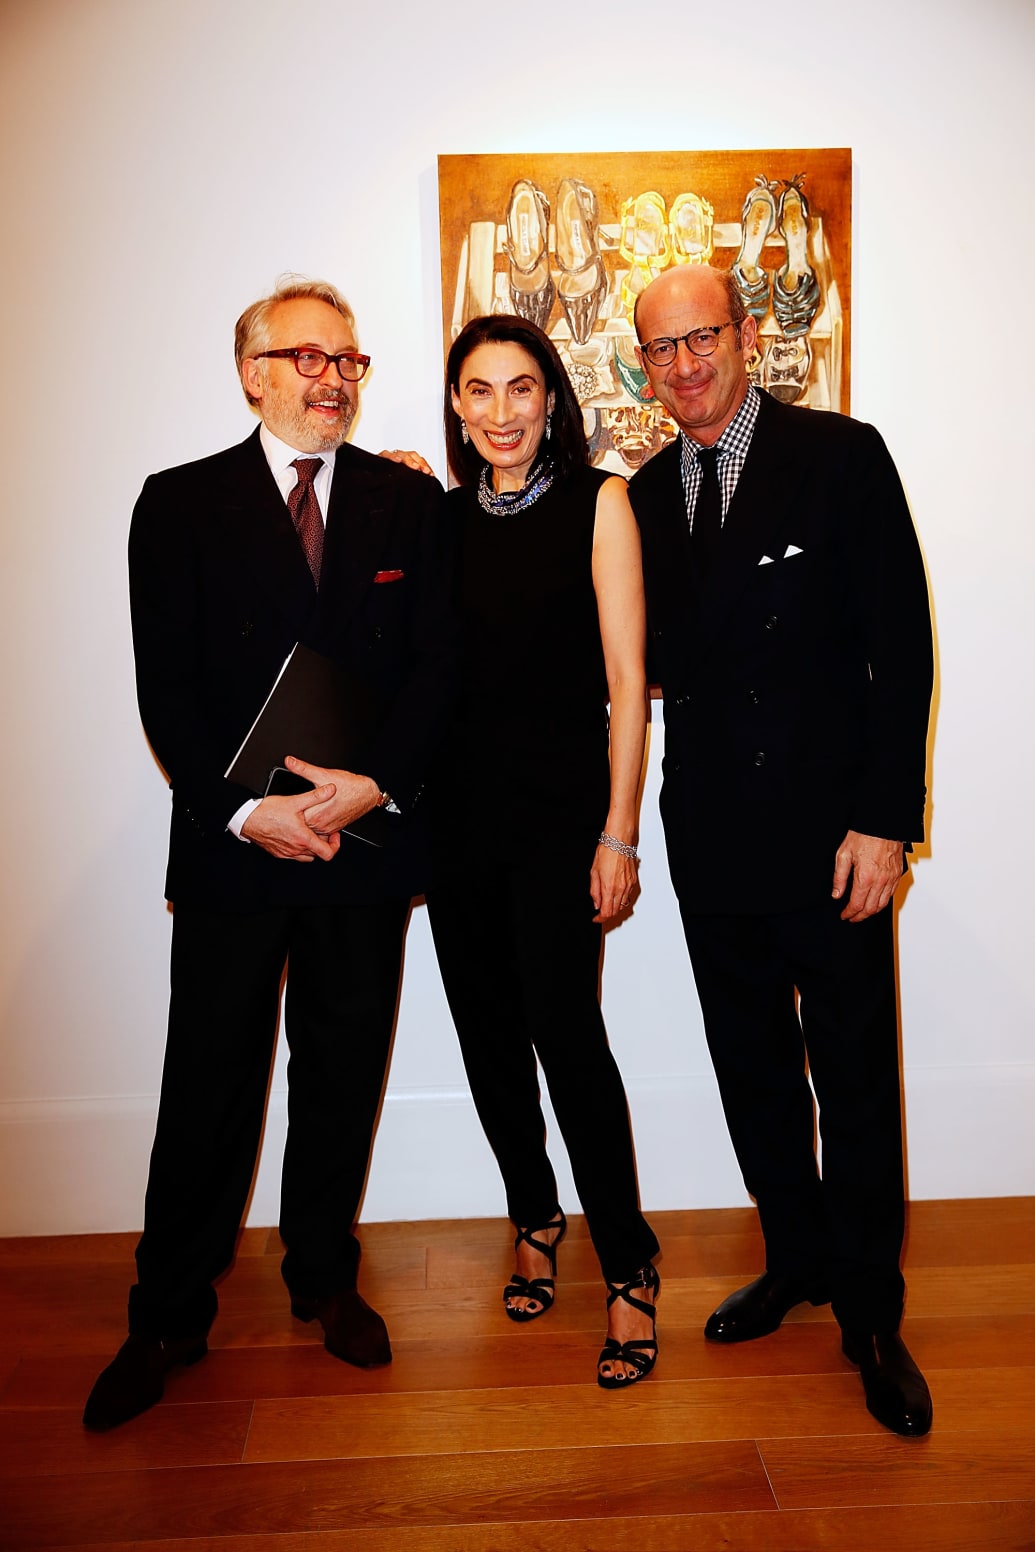 A photo of Edmondo di Robilant, artist Anh Duong, and Marco Voena at a 2014 reception in London.